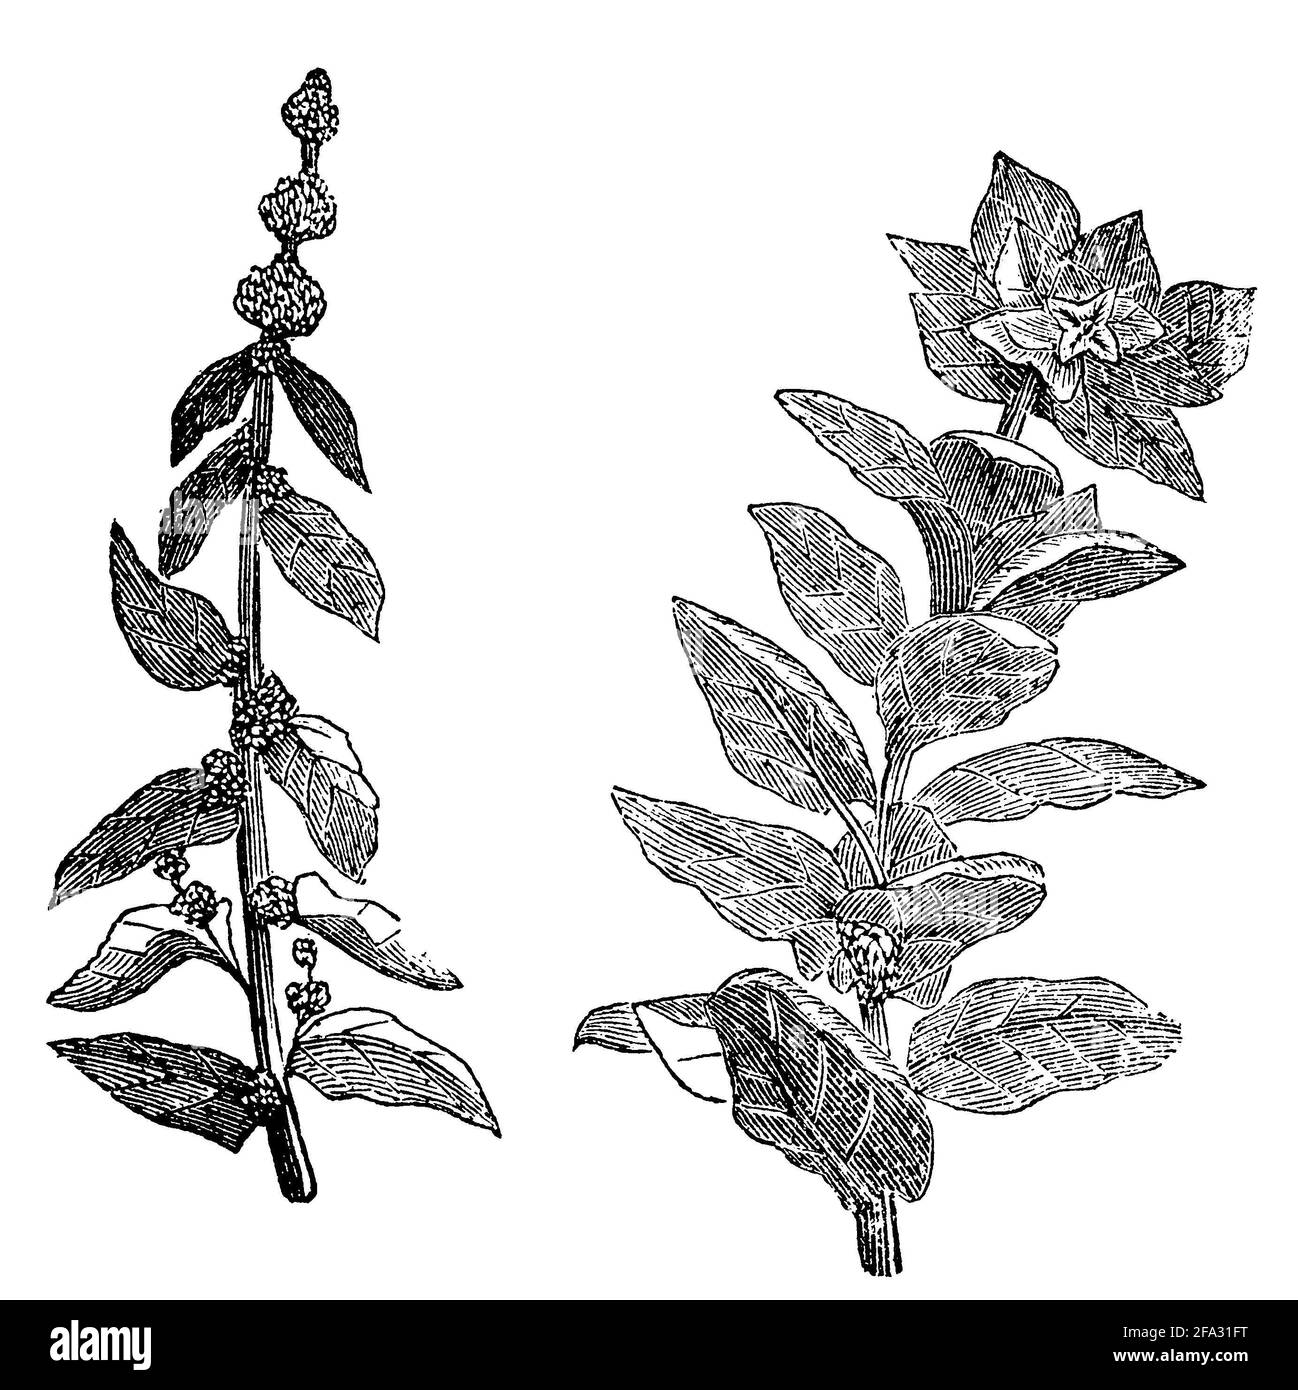 Spinach / Spinacia oleracea / Spinat (biology book, 1881) Stock Photo